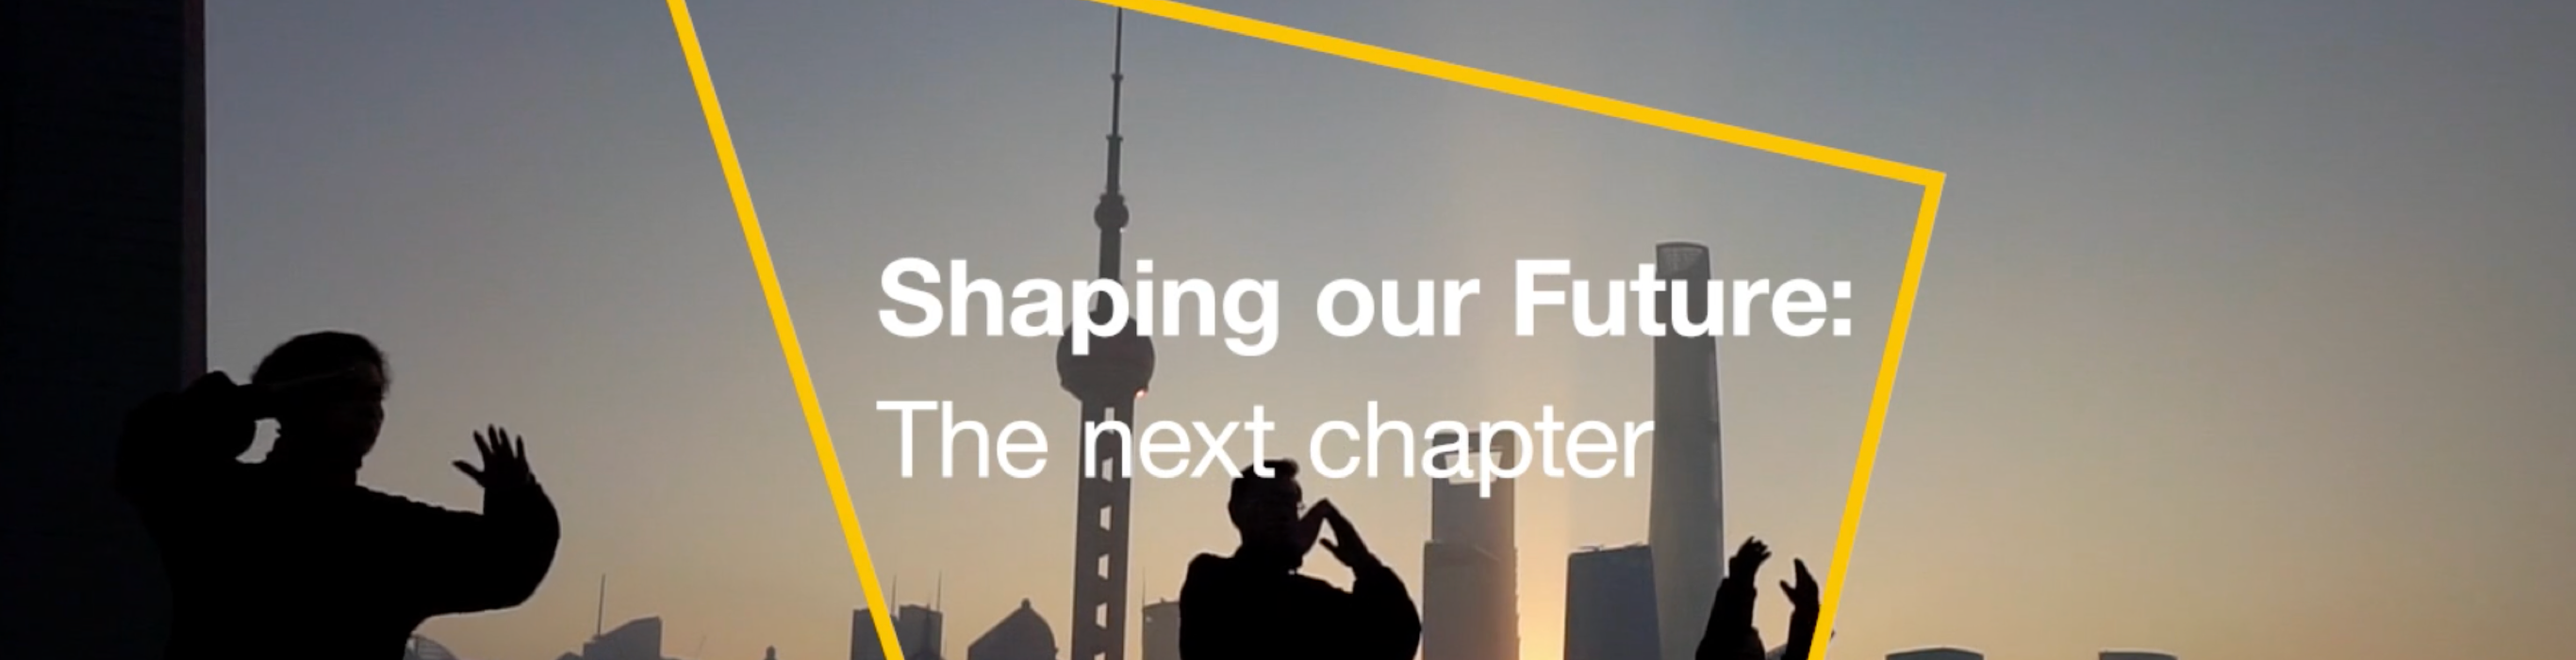 Gleeds video series on the next chapter on shaping our future